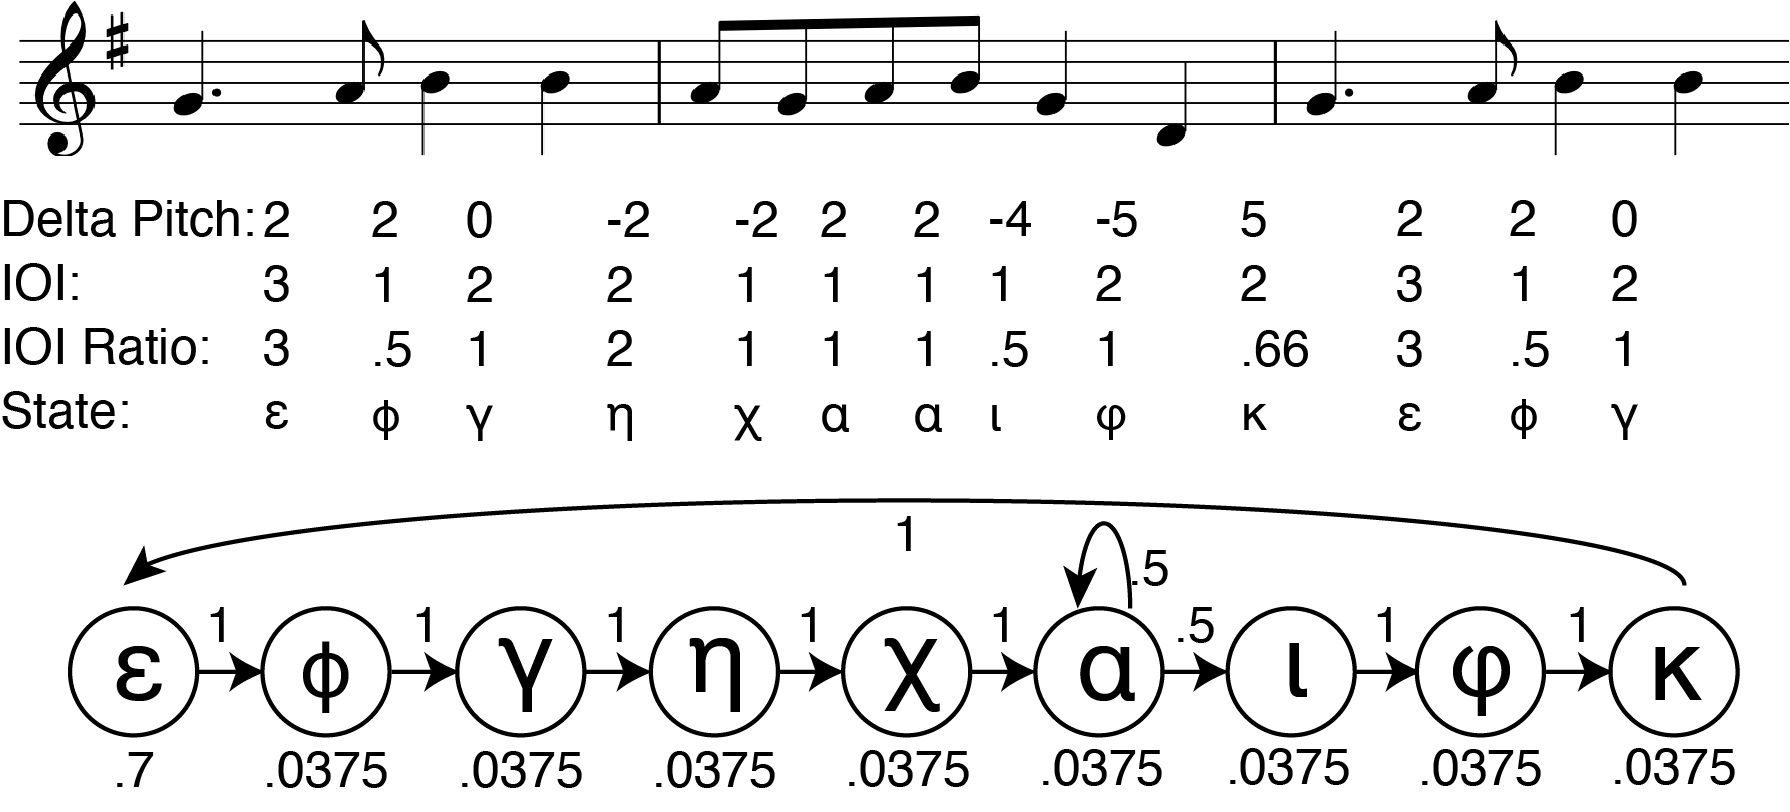 A Hidden Markov Model used to predict a melodic sequence. (Adapted from: http://www.dlib.org/dlib/february02/birmingham/birmingham-appendix2.html)